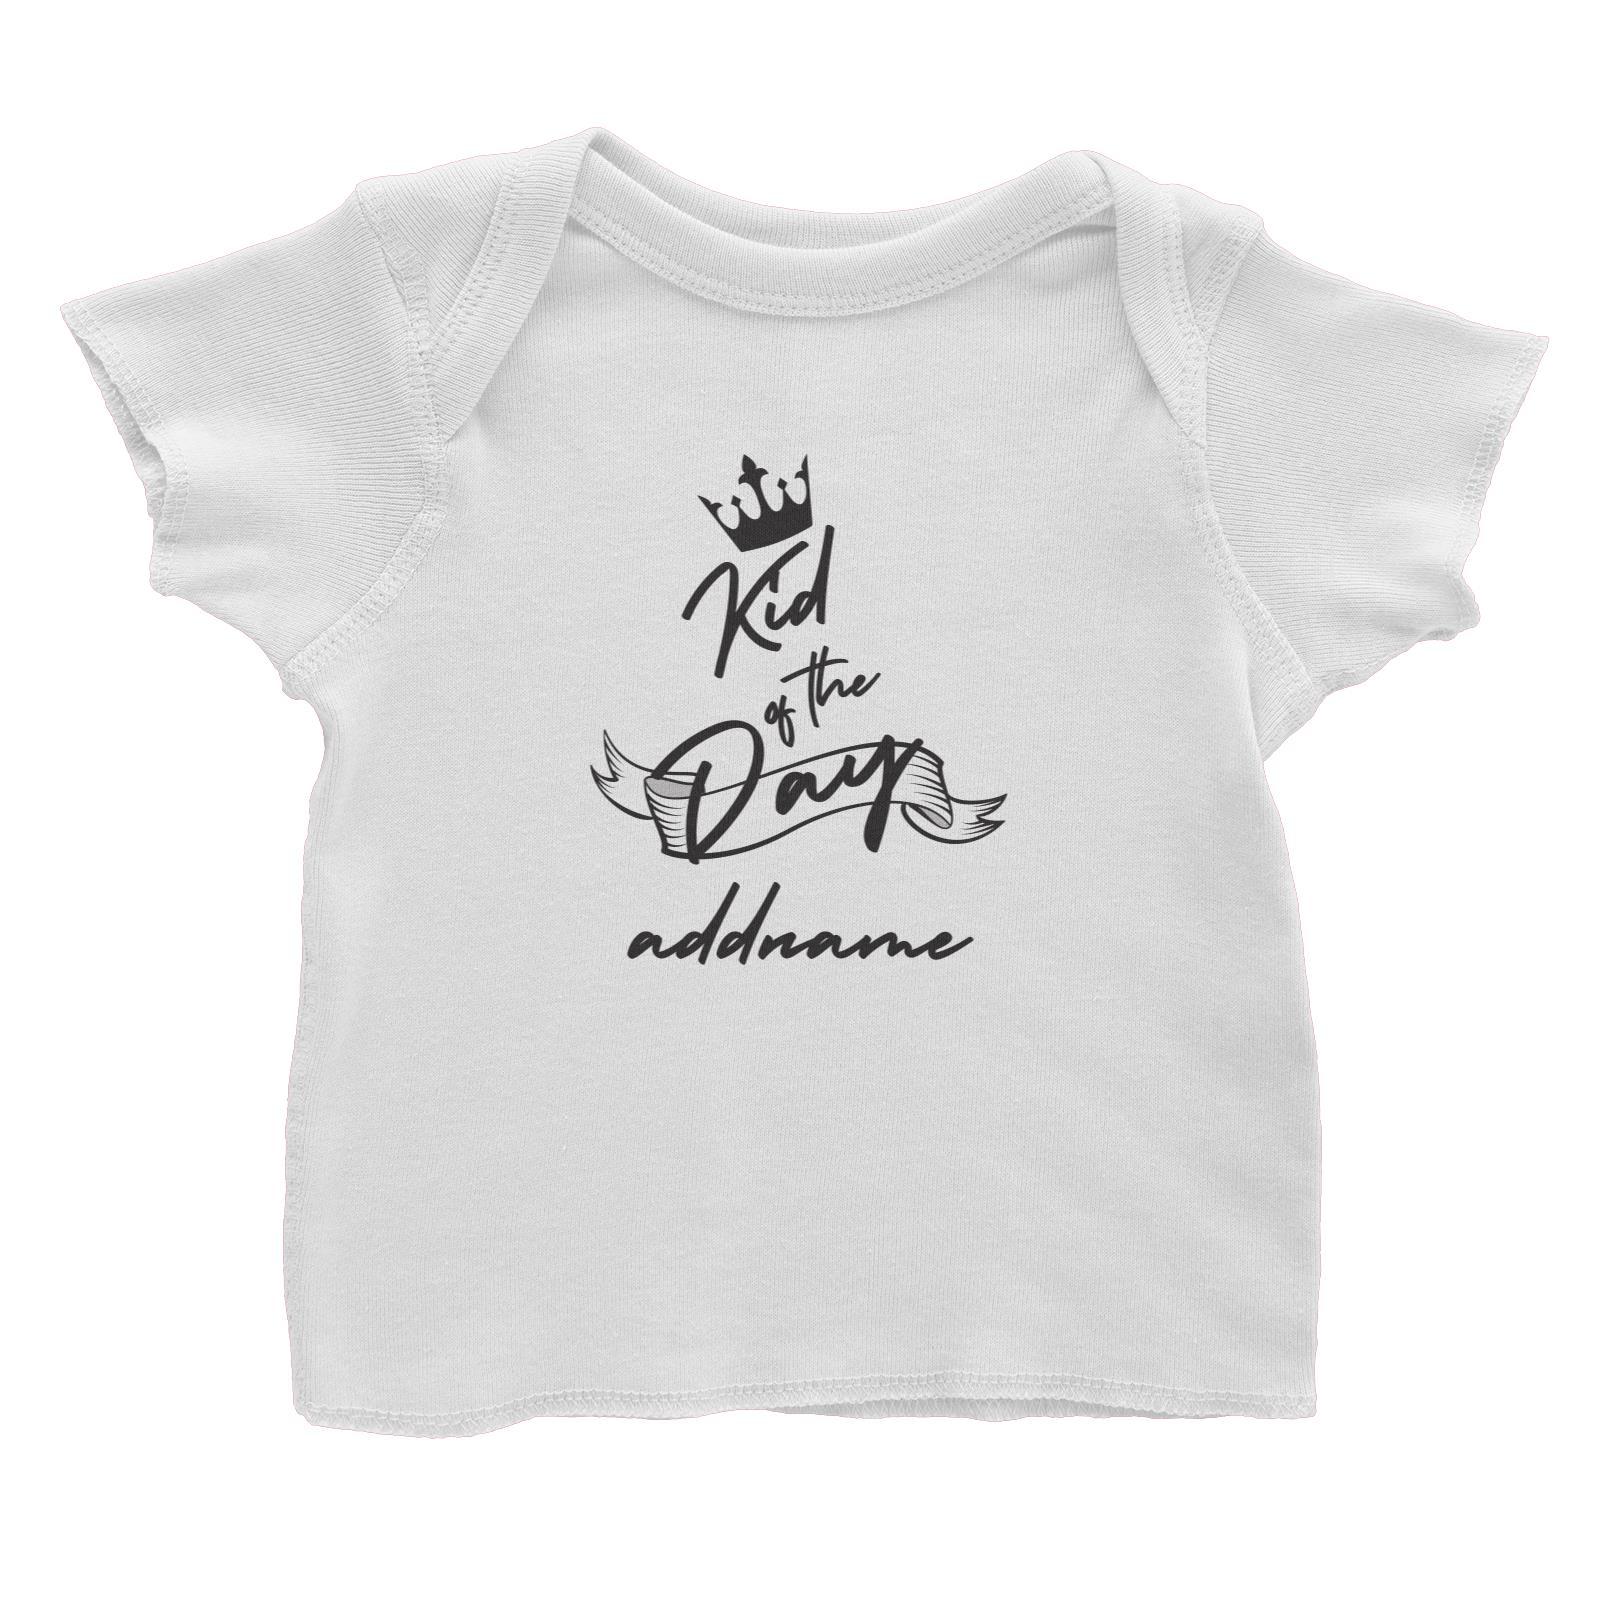 Birthday Typography Kid Of The Day Addname Baby T-Shirt